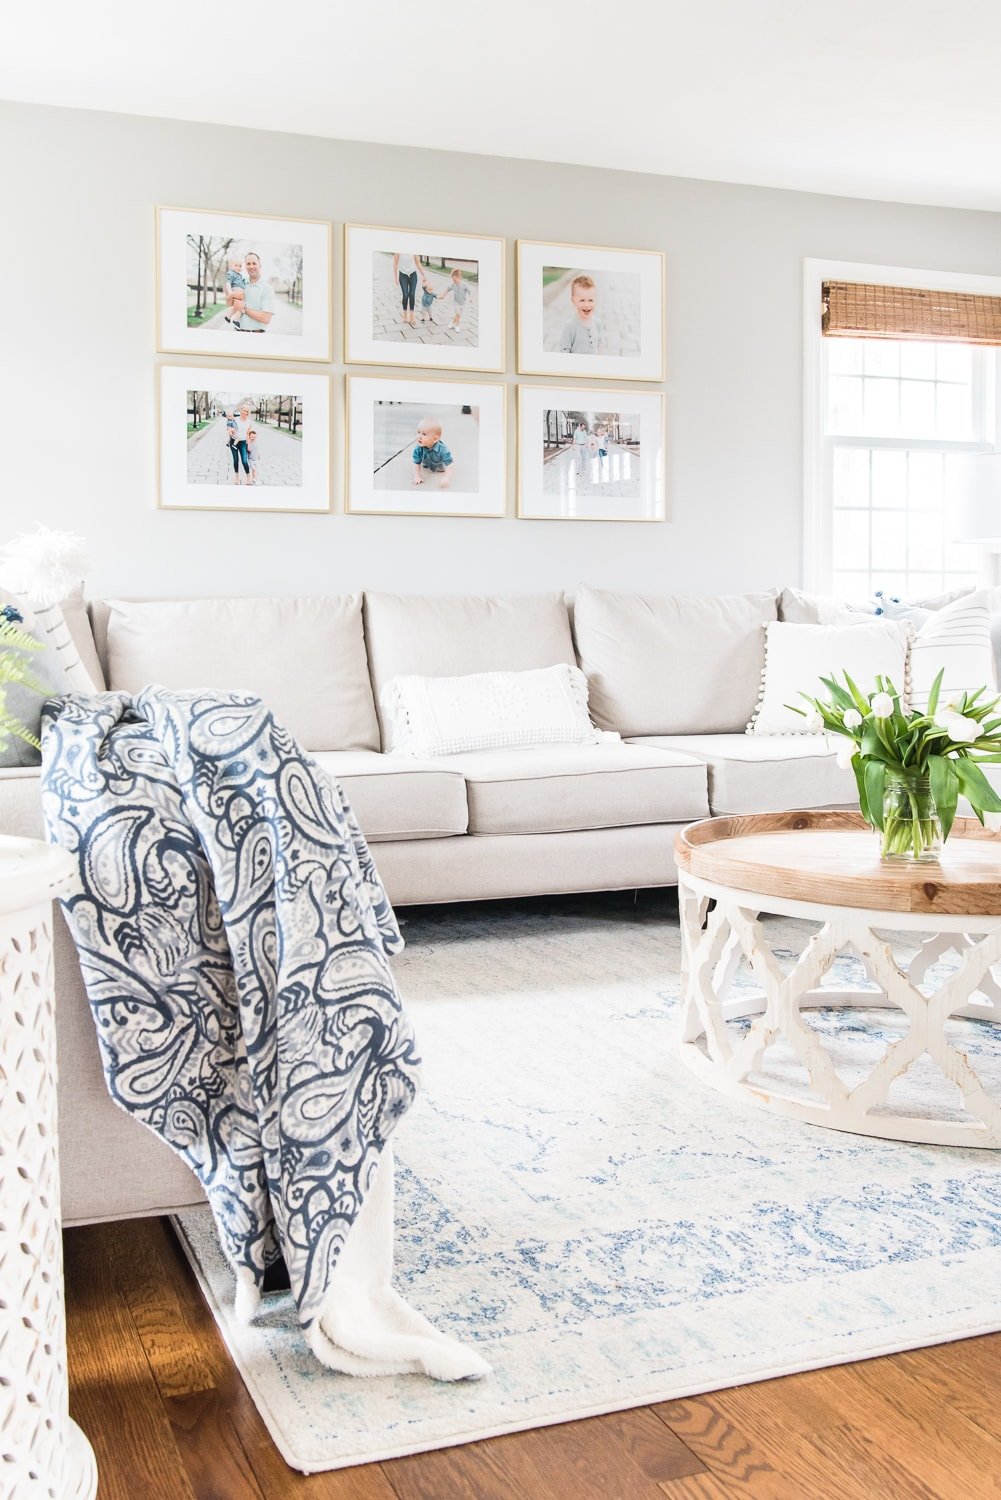 Living room that shows example of Jenna's style